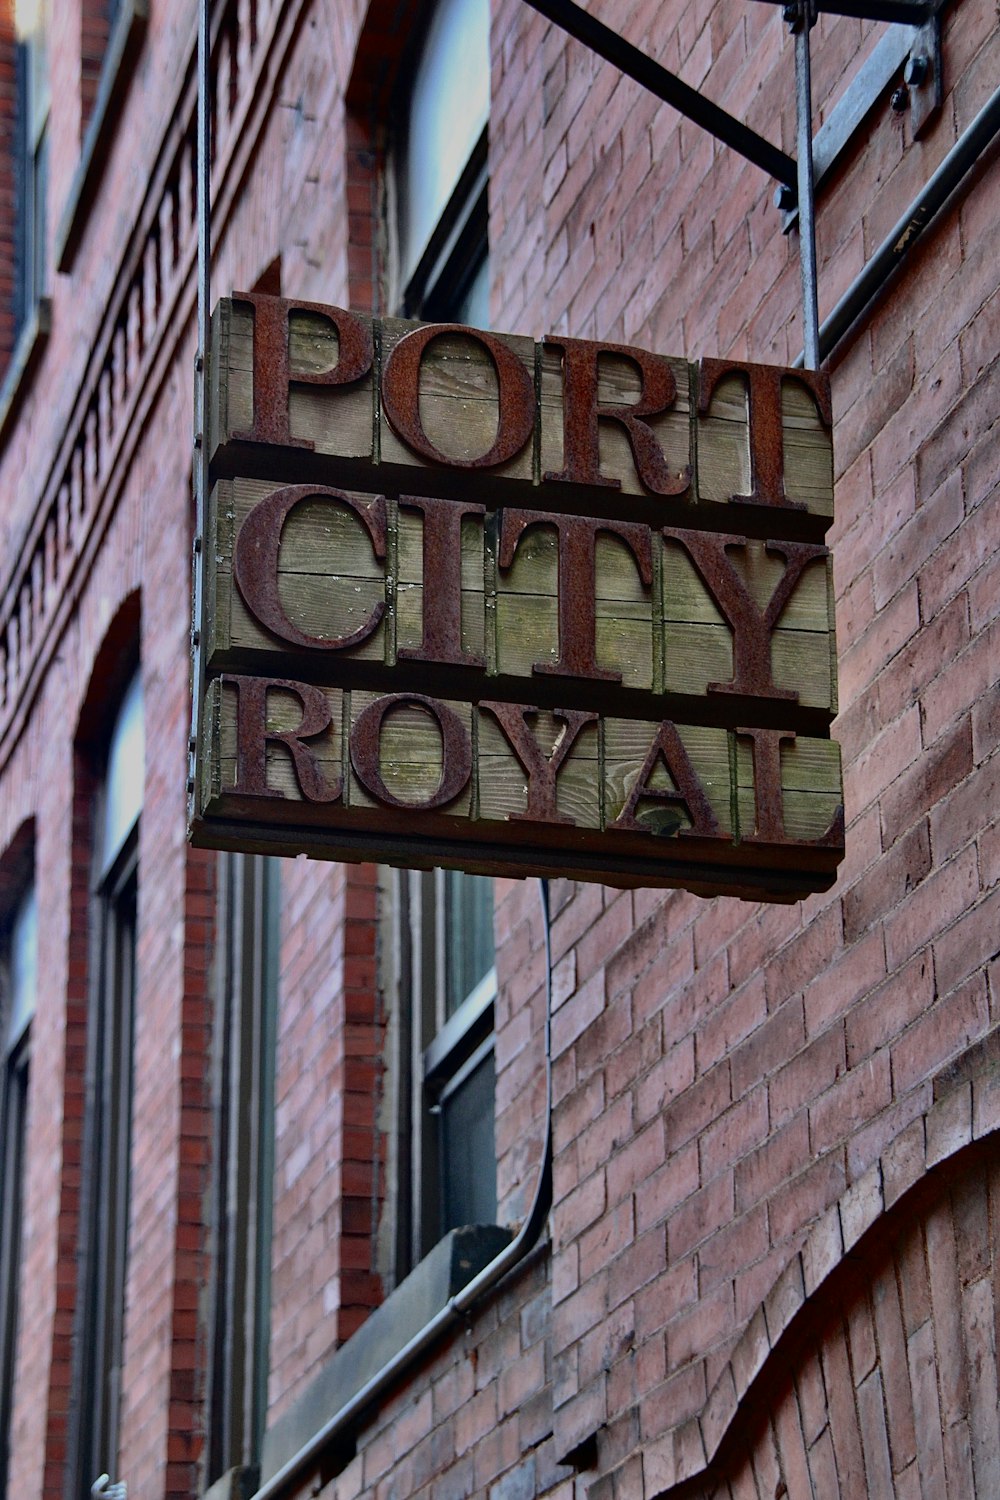 a brick building with a sign that says port city royal